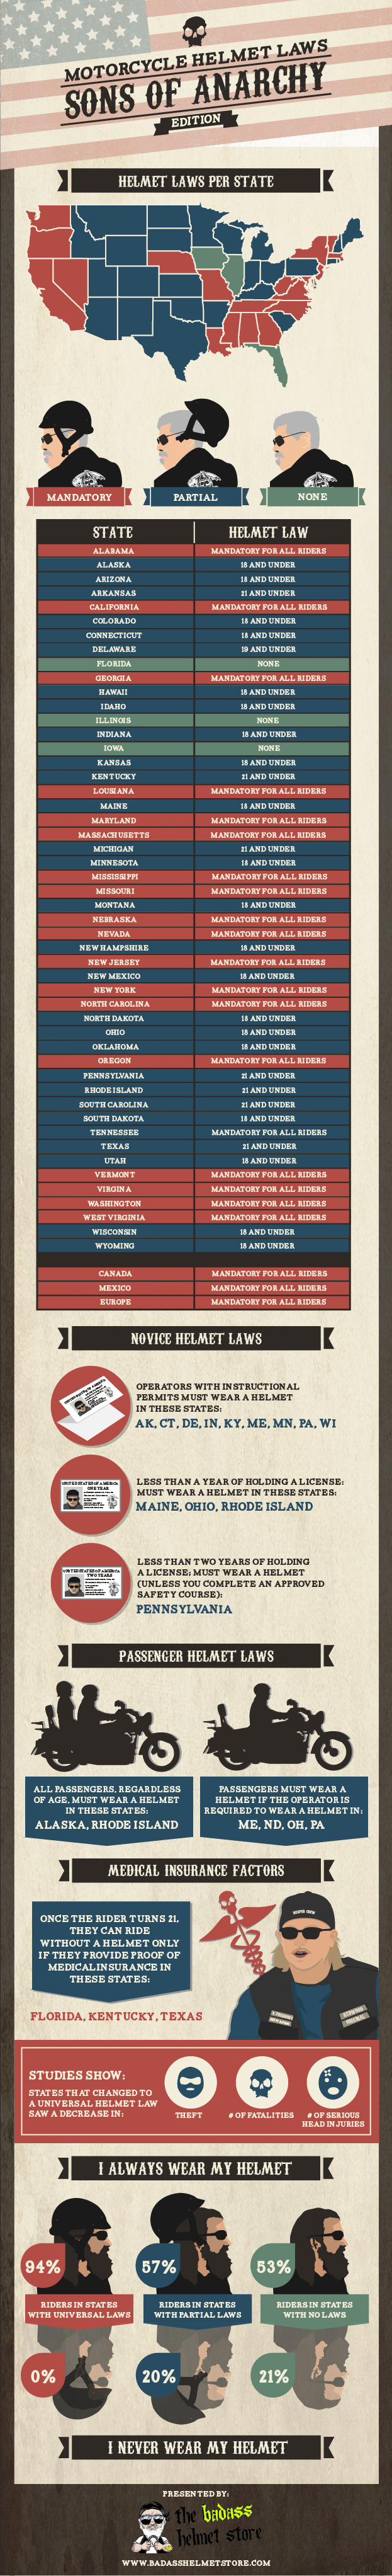 Sons of Anarchy infographic on motorcycle helmet laws by the badasshelmetstore.com